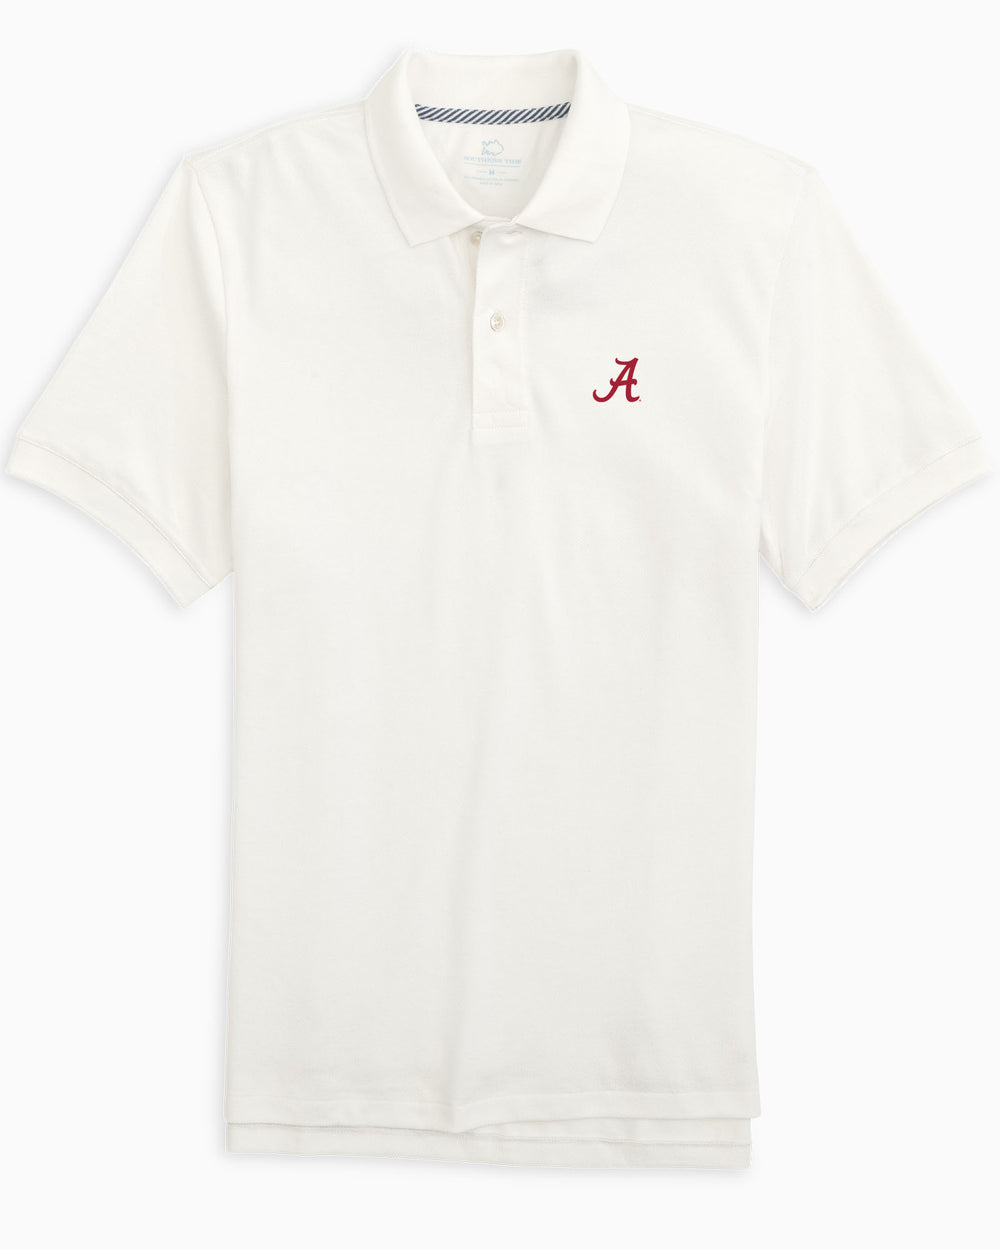 The front of the Alabama Crimson Tide New Short Sleeve Skipjack Polo by Southern Tide - Classic White